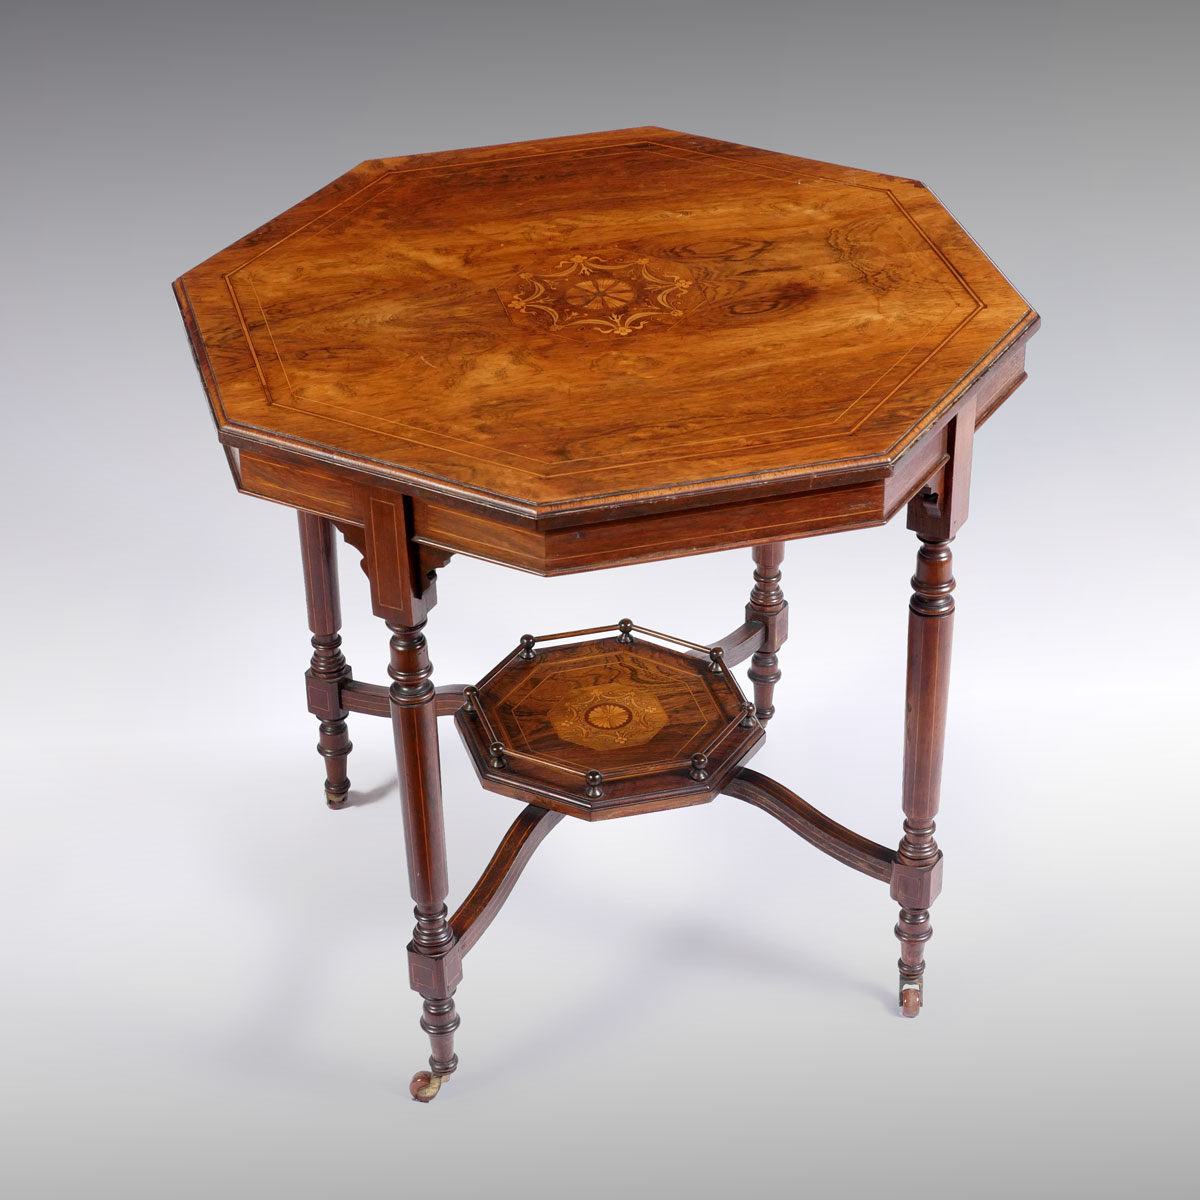 2-TIERED OCTAGONAL INLAID TABLE: Banded